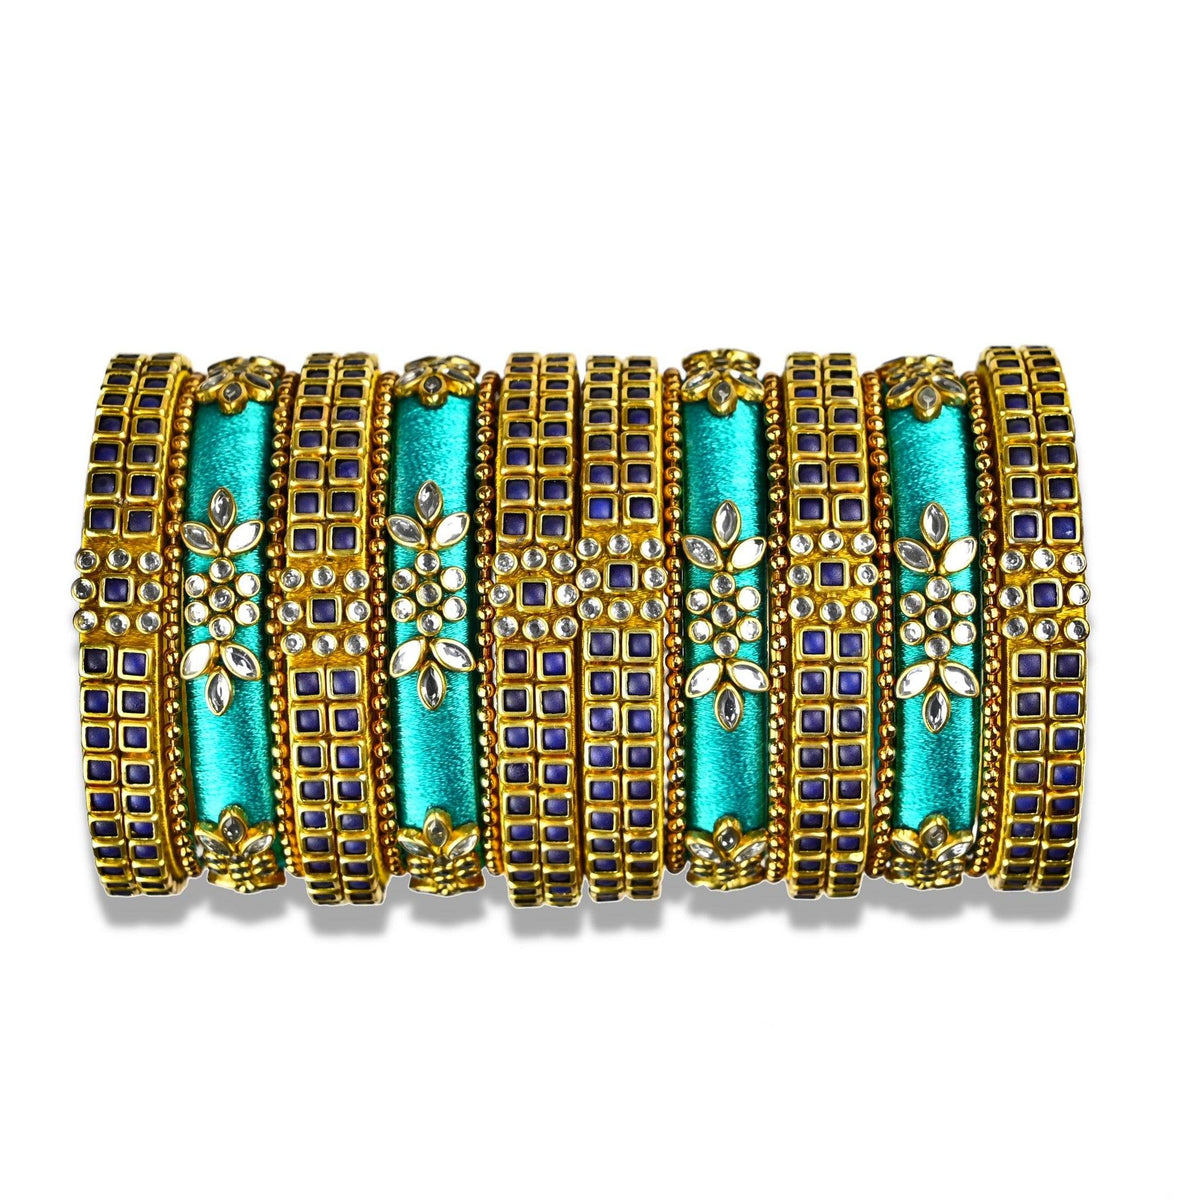 A divine set of silk thread bangles beautifully ornamented with teal blue silk thread and navy blue kundan stone bezels. The bangles comes in a set of 18 with 9 for each hand.